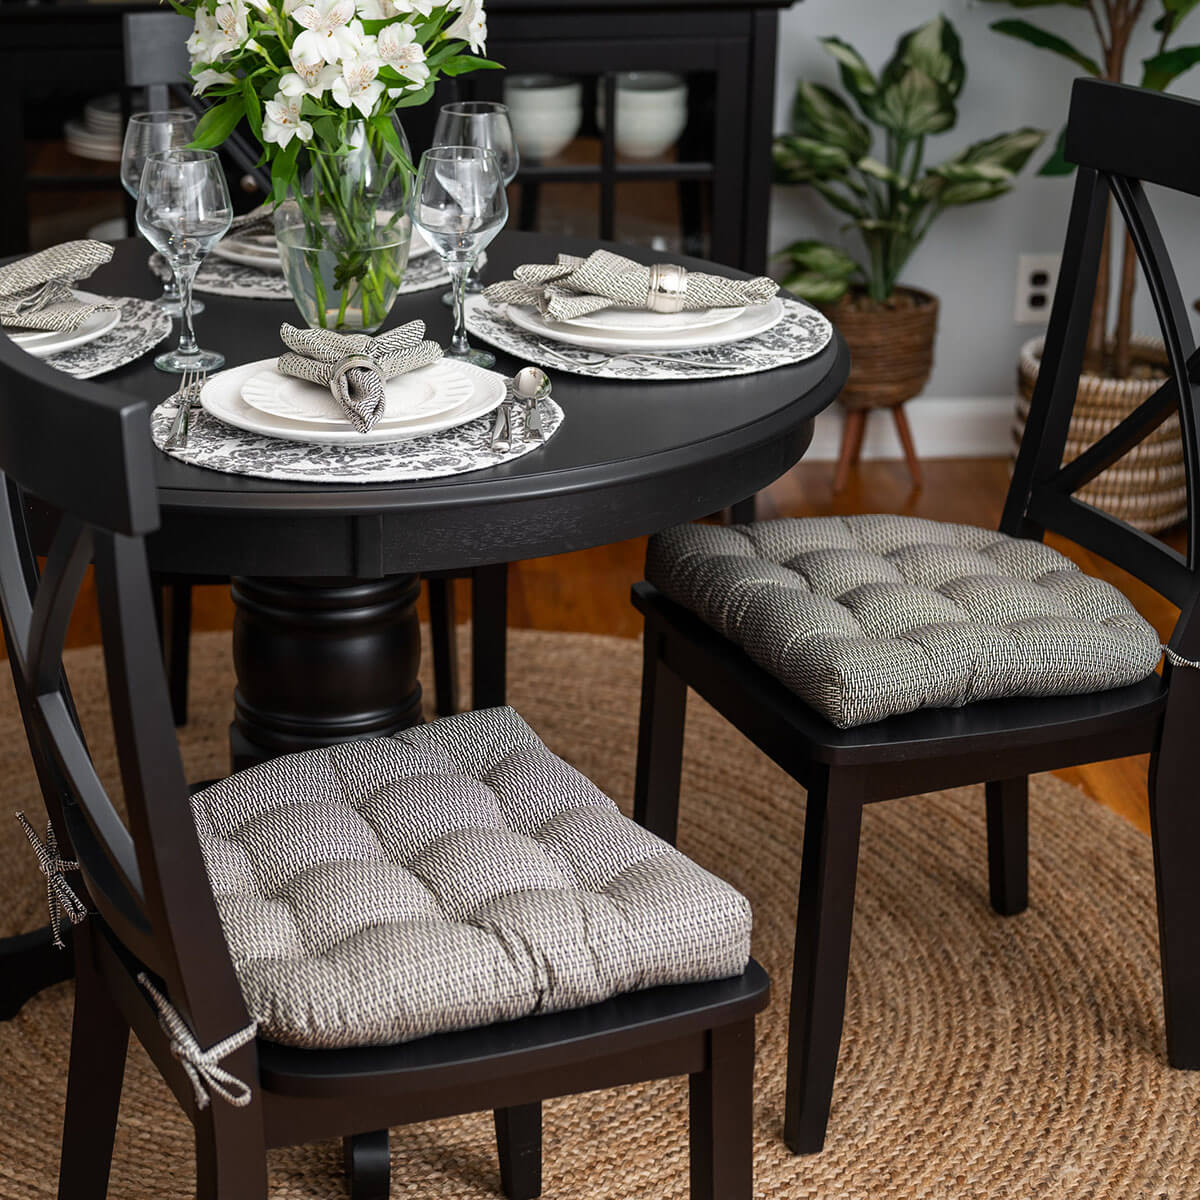 black basketweave dining chair cushions on black dining chairs in formal dining room